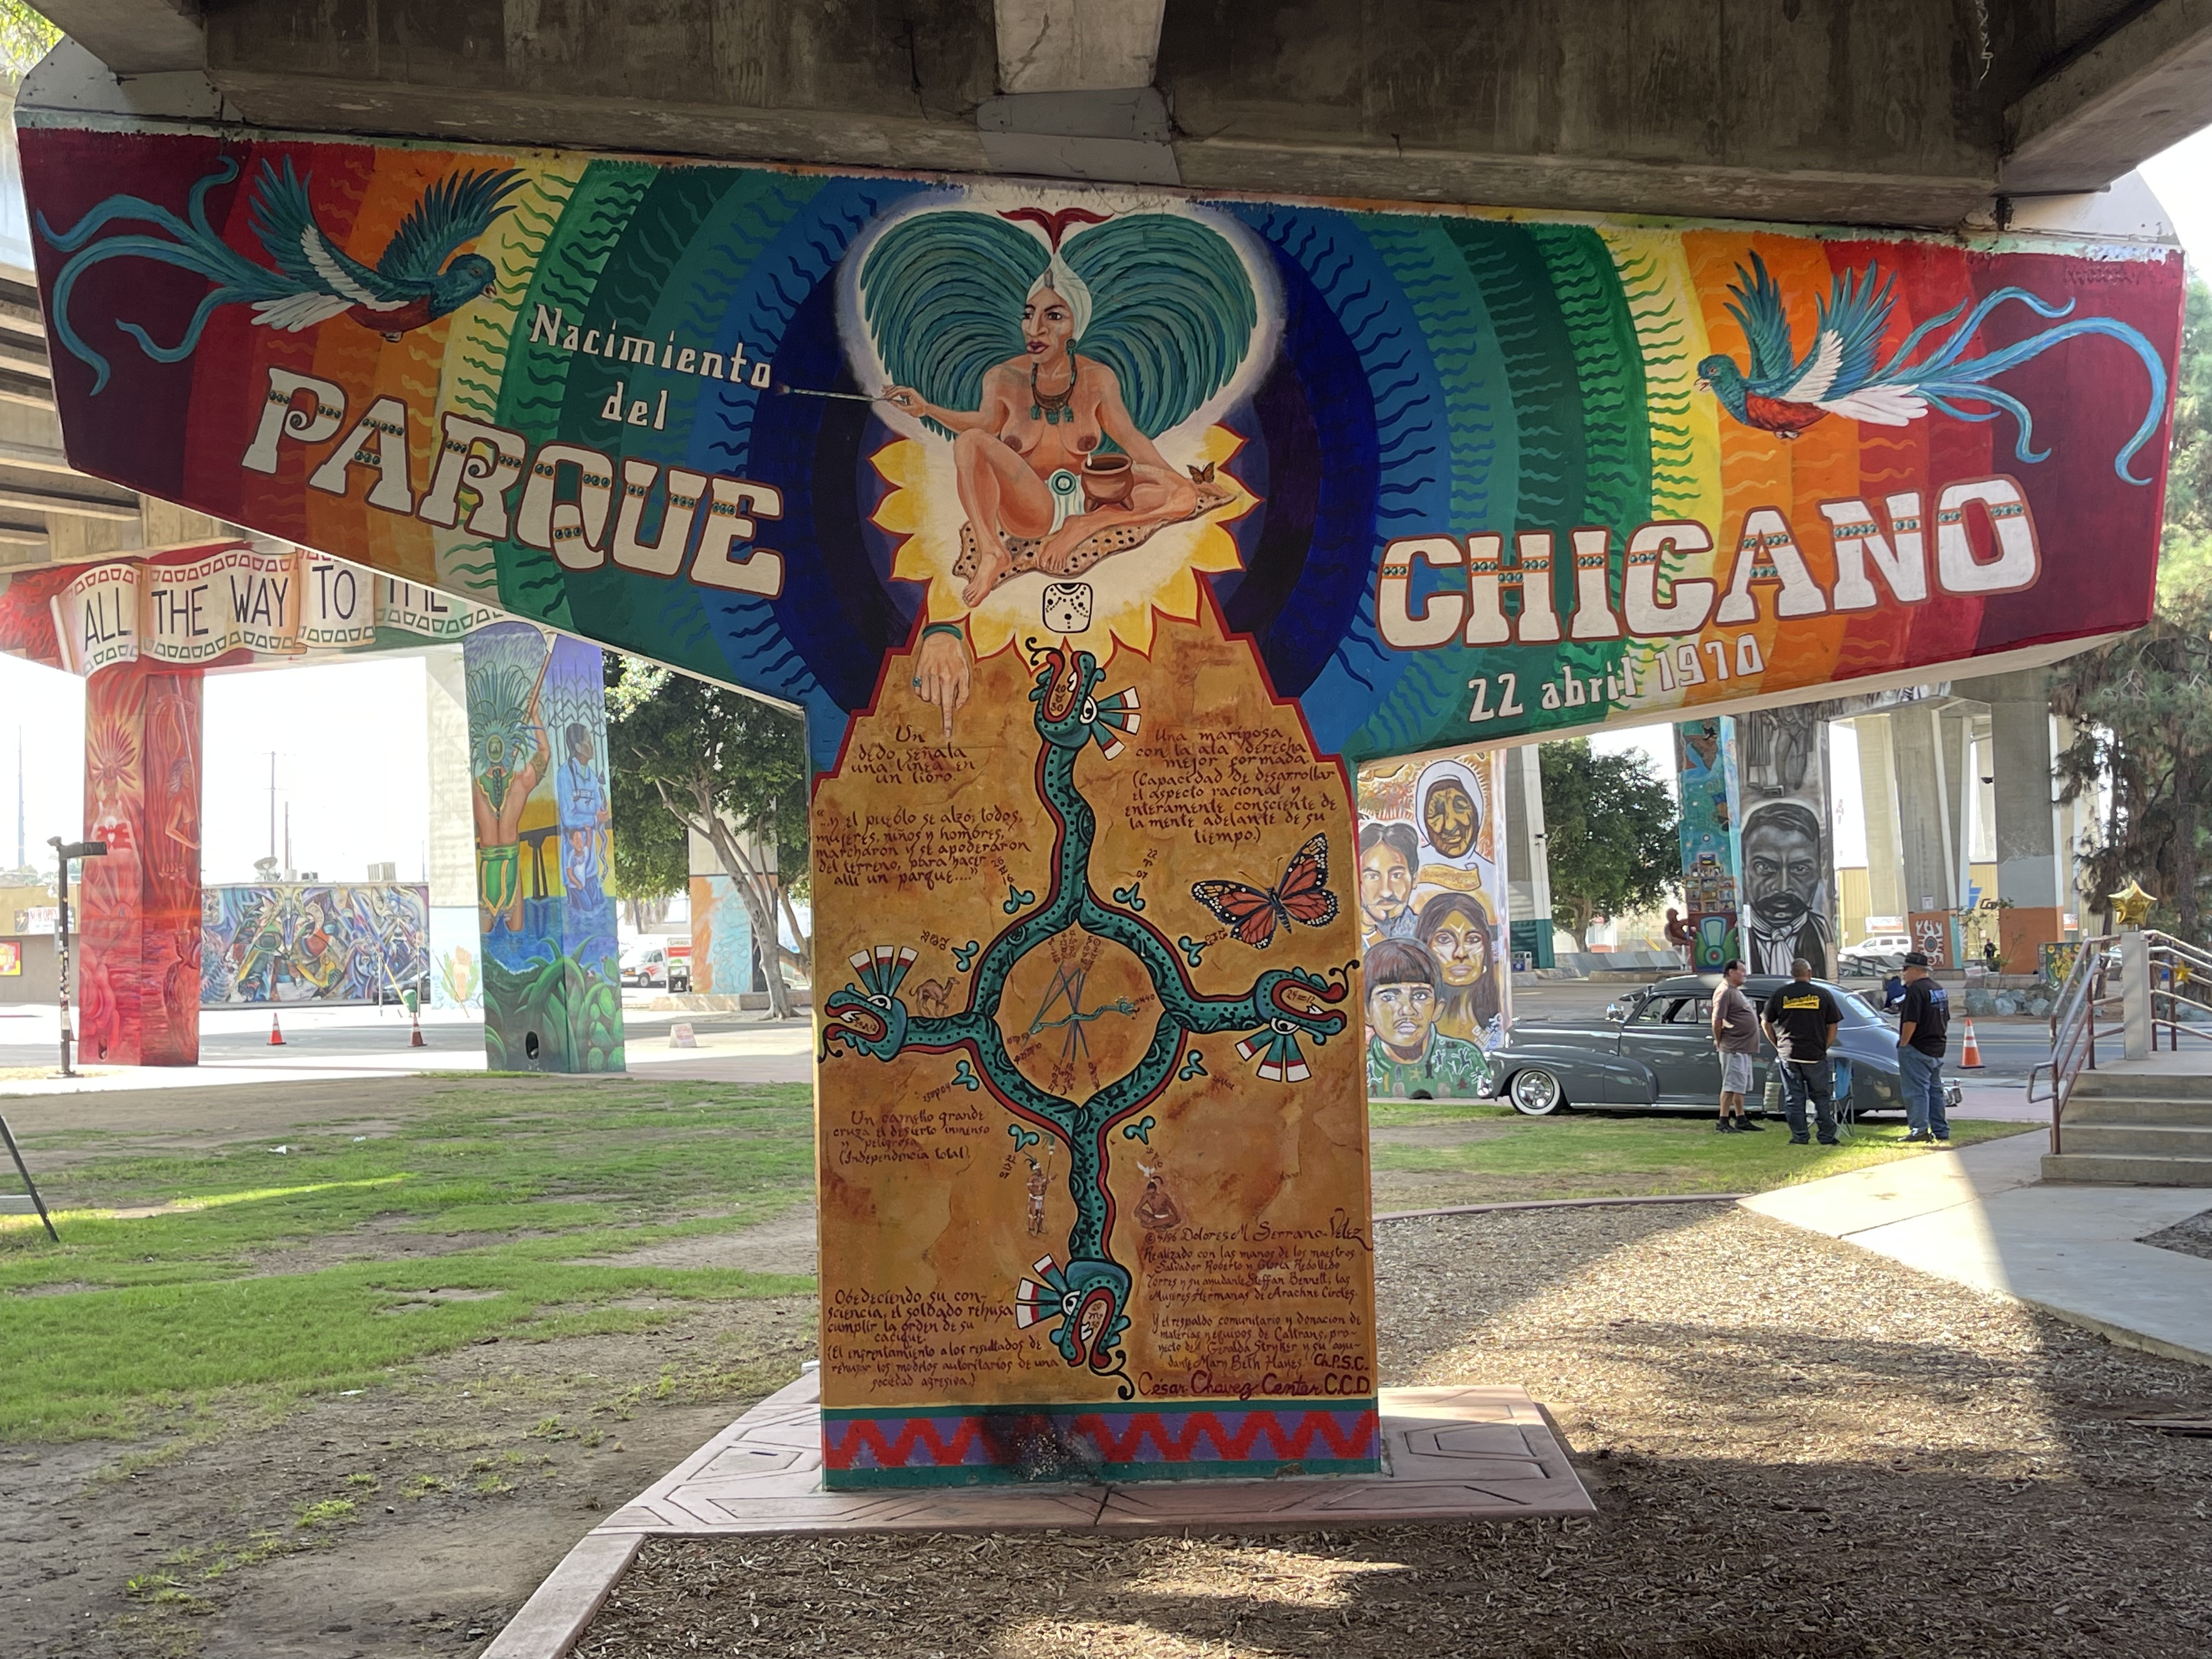 A mural with Indigenous style artwork and a four-directional serpent and a goddess figure against a rainbow background.